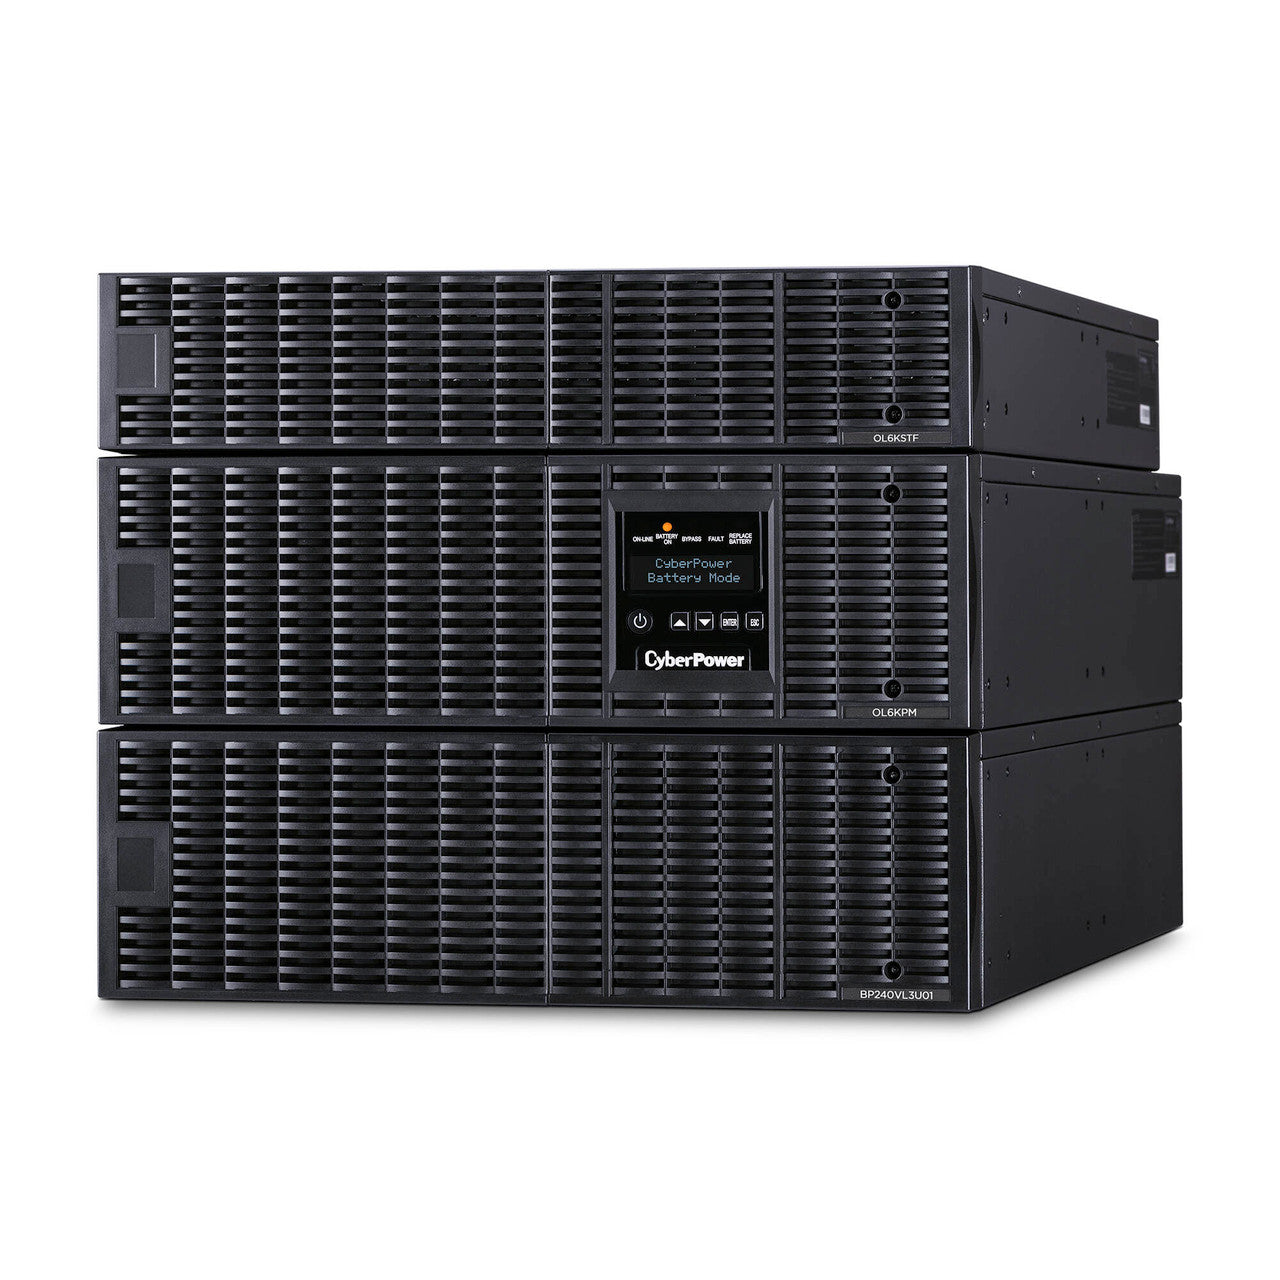 CyberPower OL6KRTF 6KVA/5.4KW, online double-conversion UPS, 6KW step-down transformer included